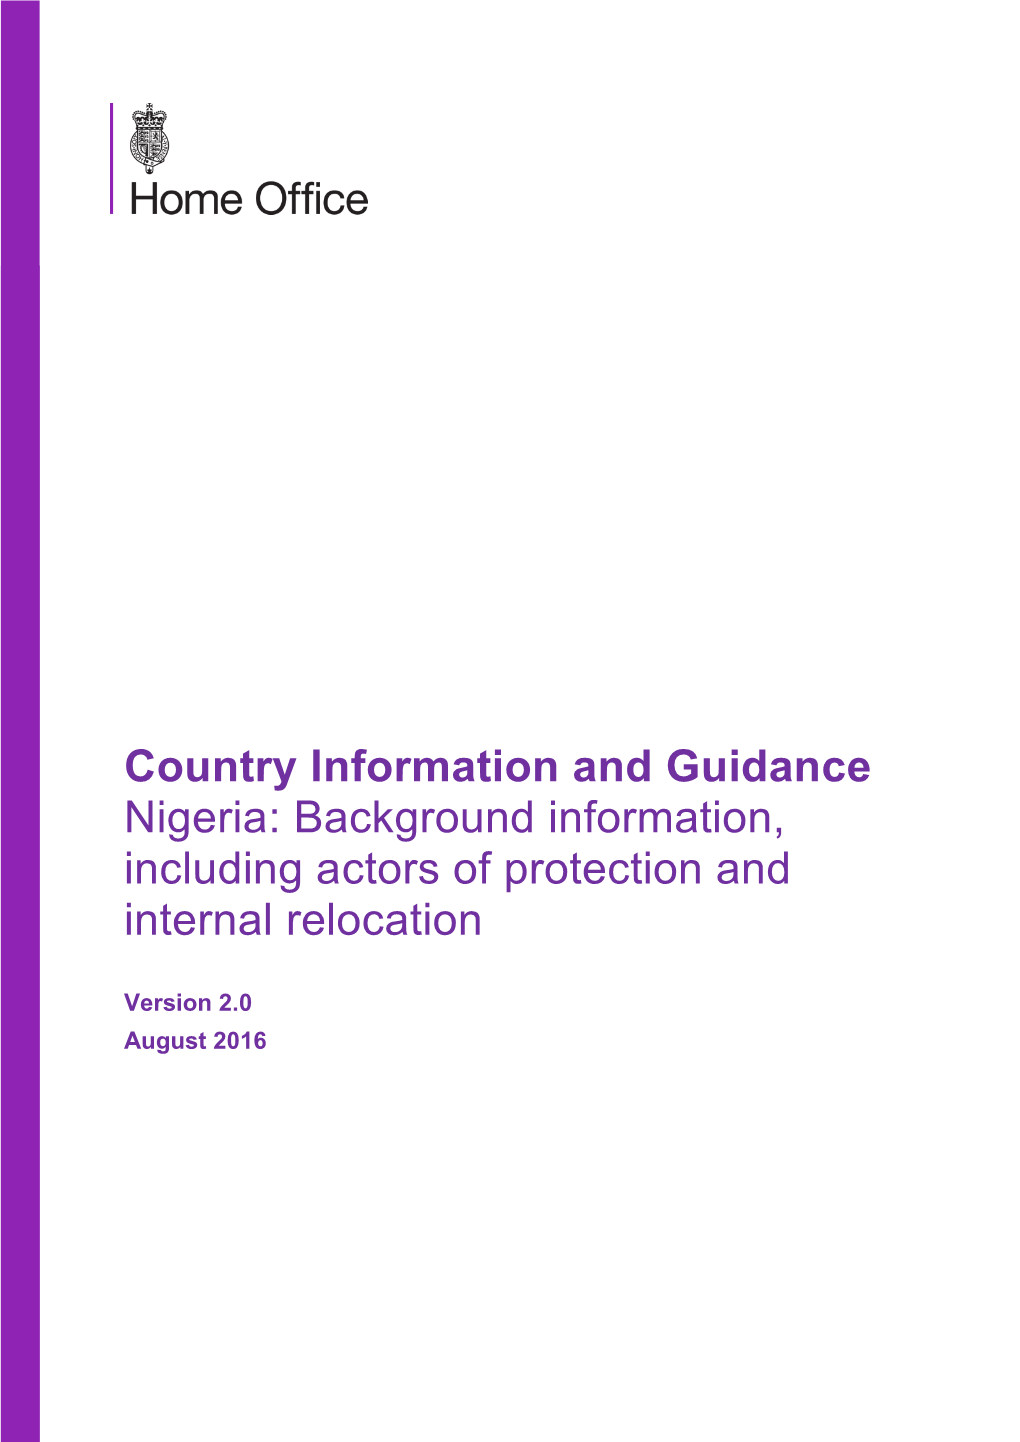 Country Information and Guidance Nigeria: Background Information, Including Actors of Protection and Internal Relocation